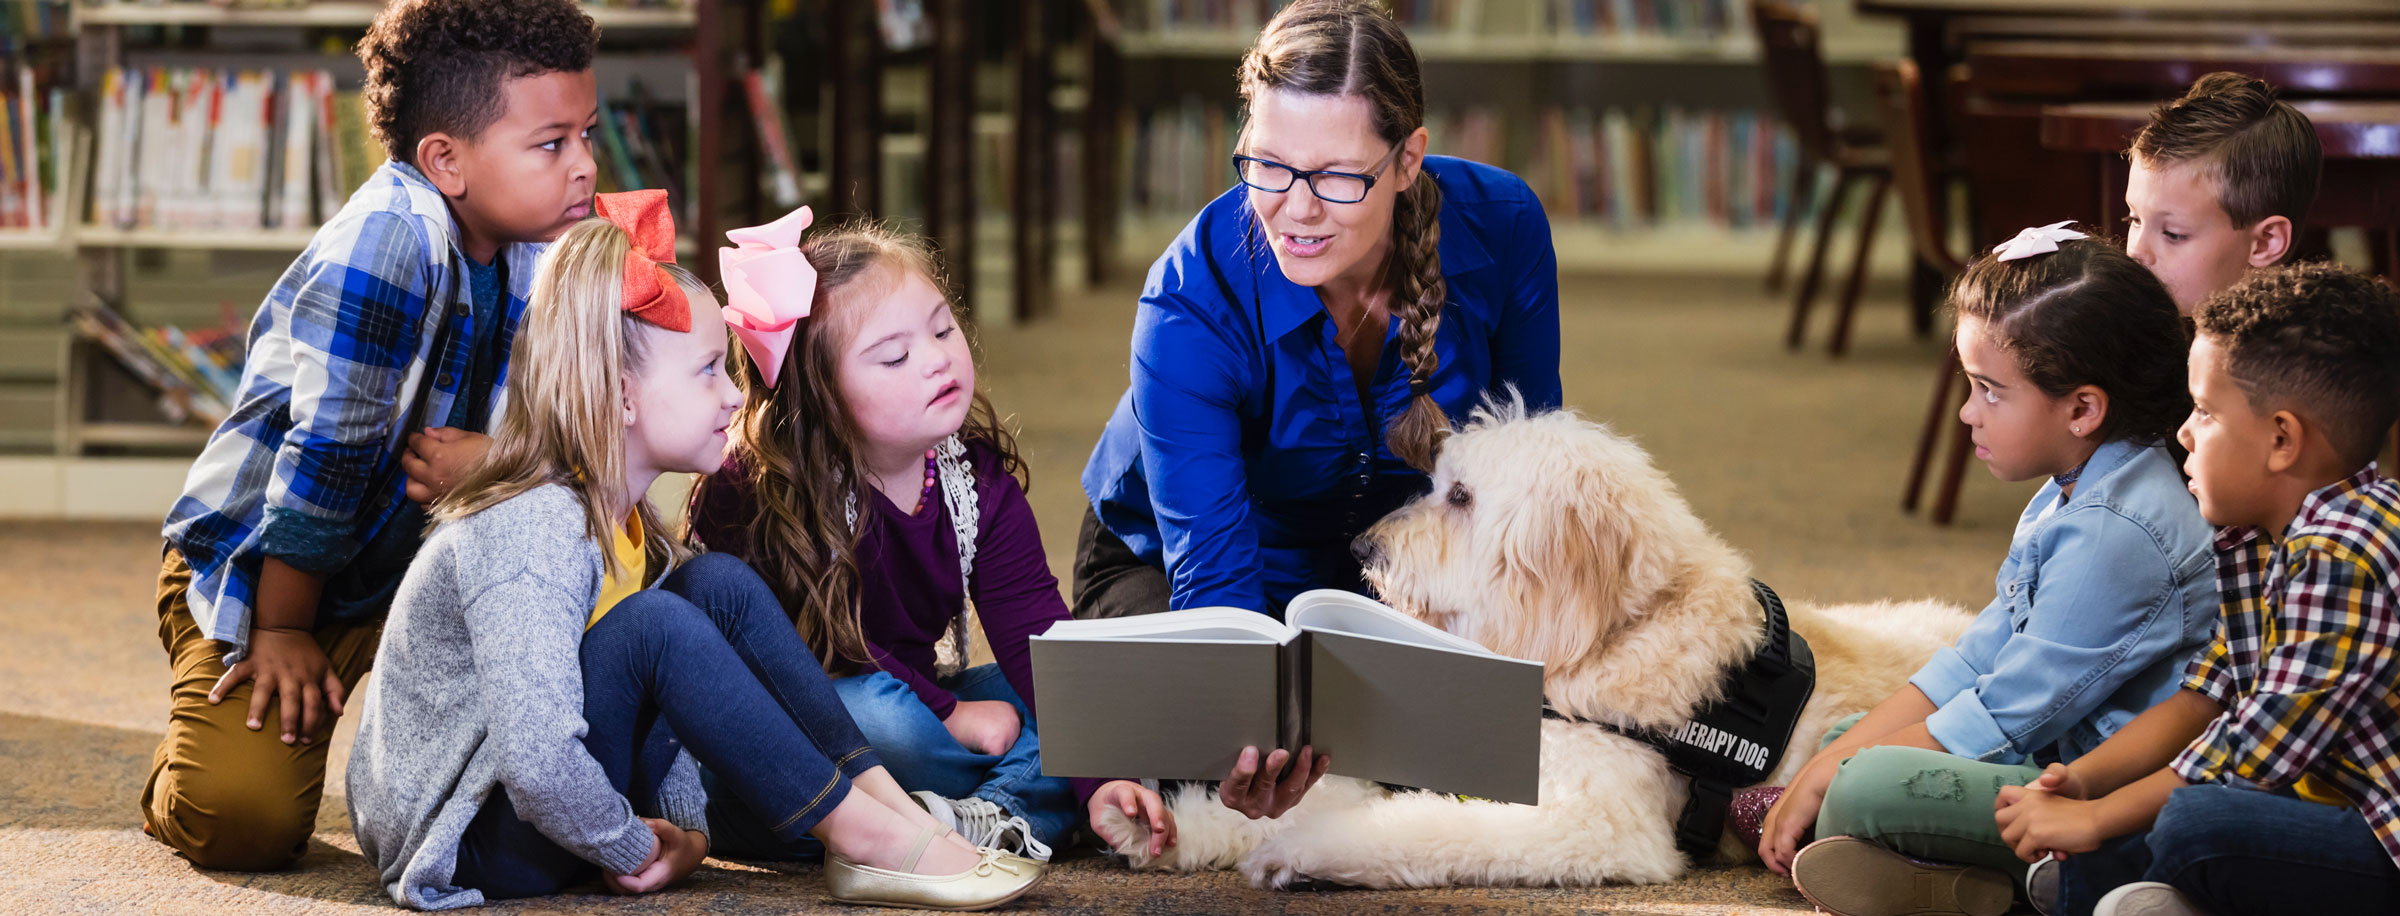 image of multiple children seated on floor with service dog while teacher reads a book